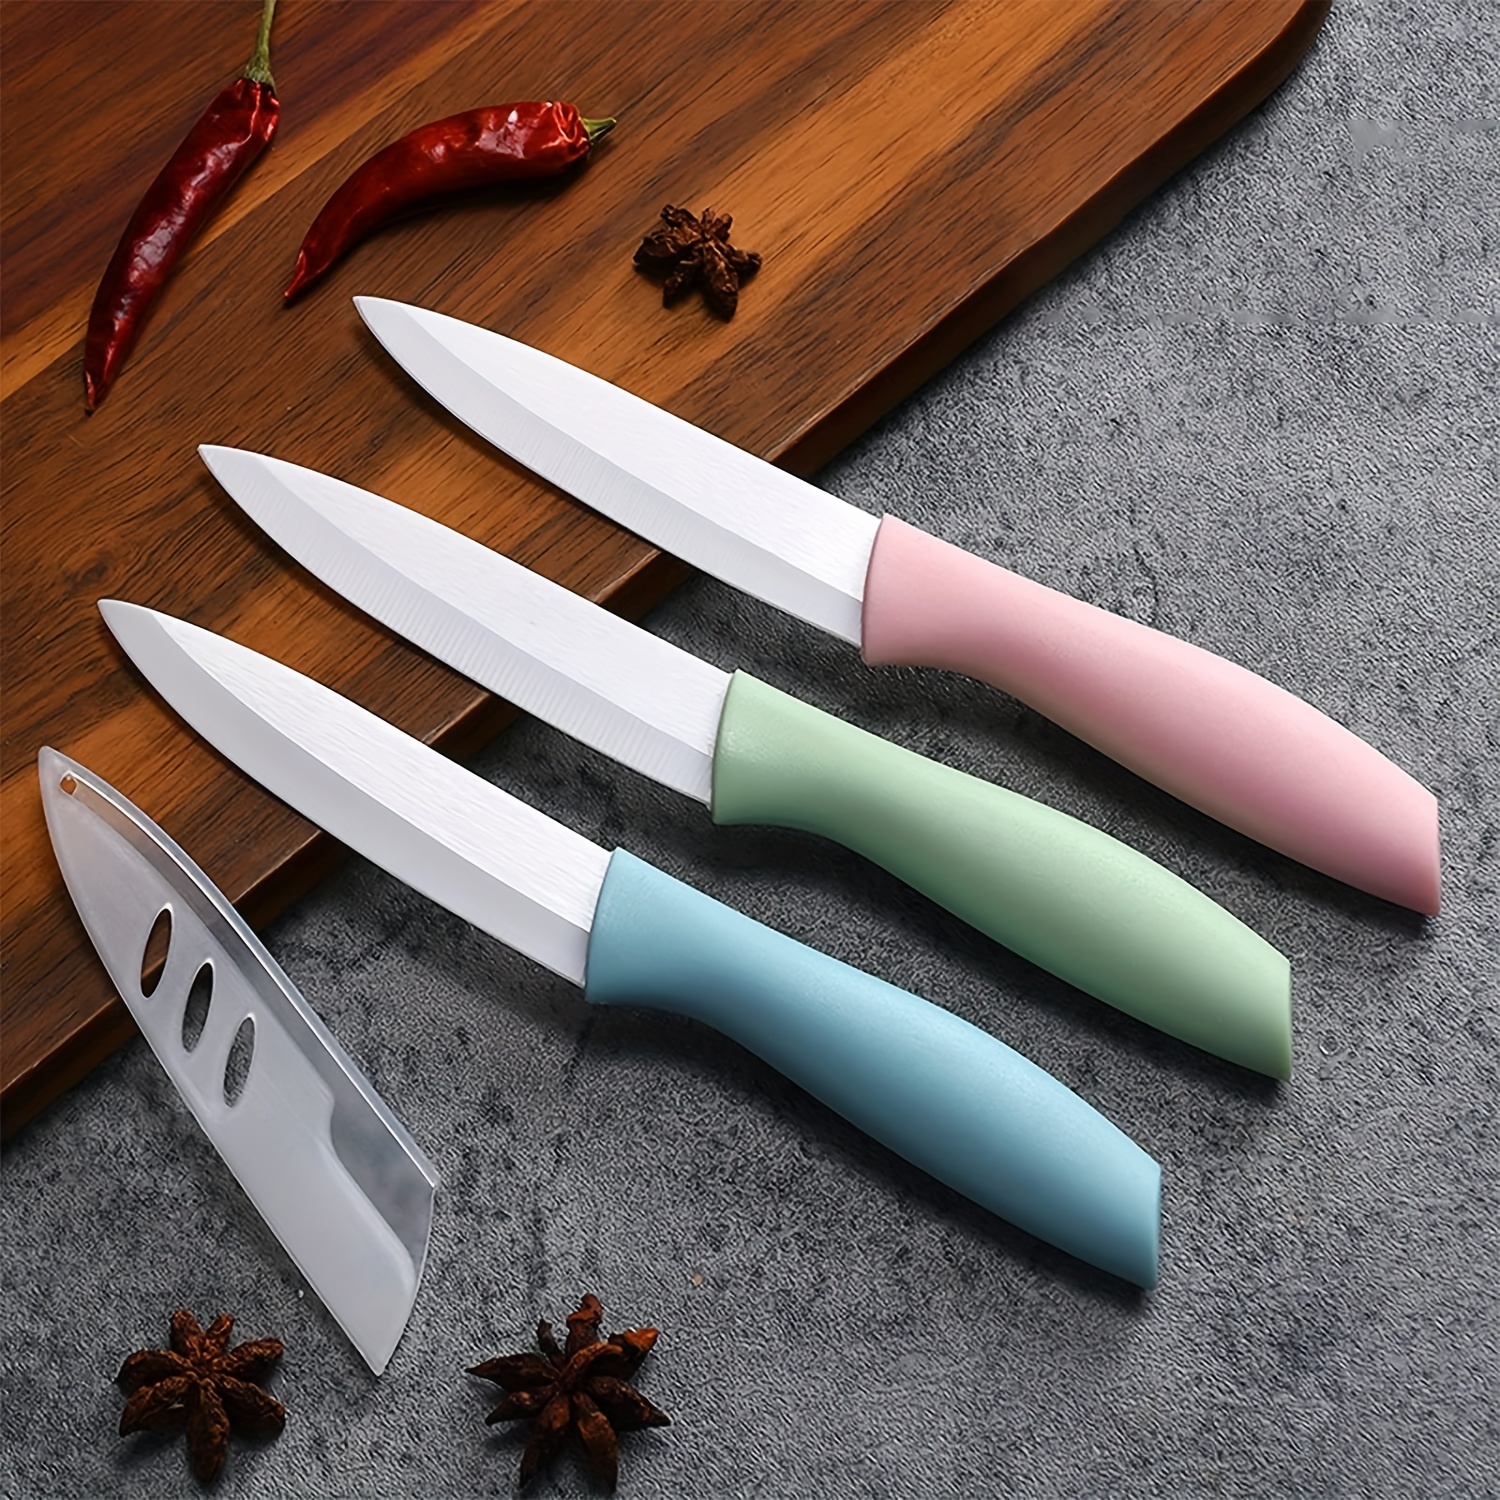 3pcs, Ceramic Knife Set, 4 Inch Fruit Paring Knives With Sheath Covers,Used  For Cooking Vegetable Fruit Bread And Meats